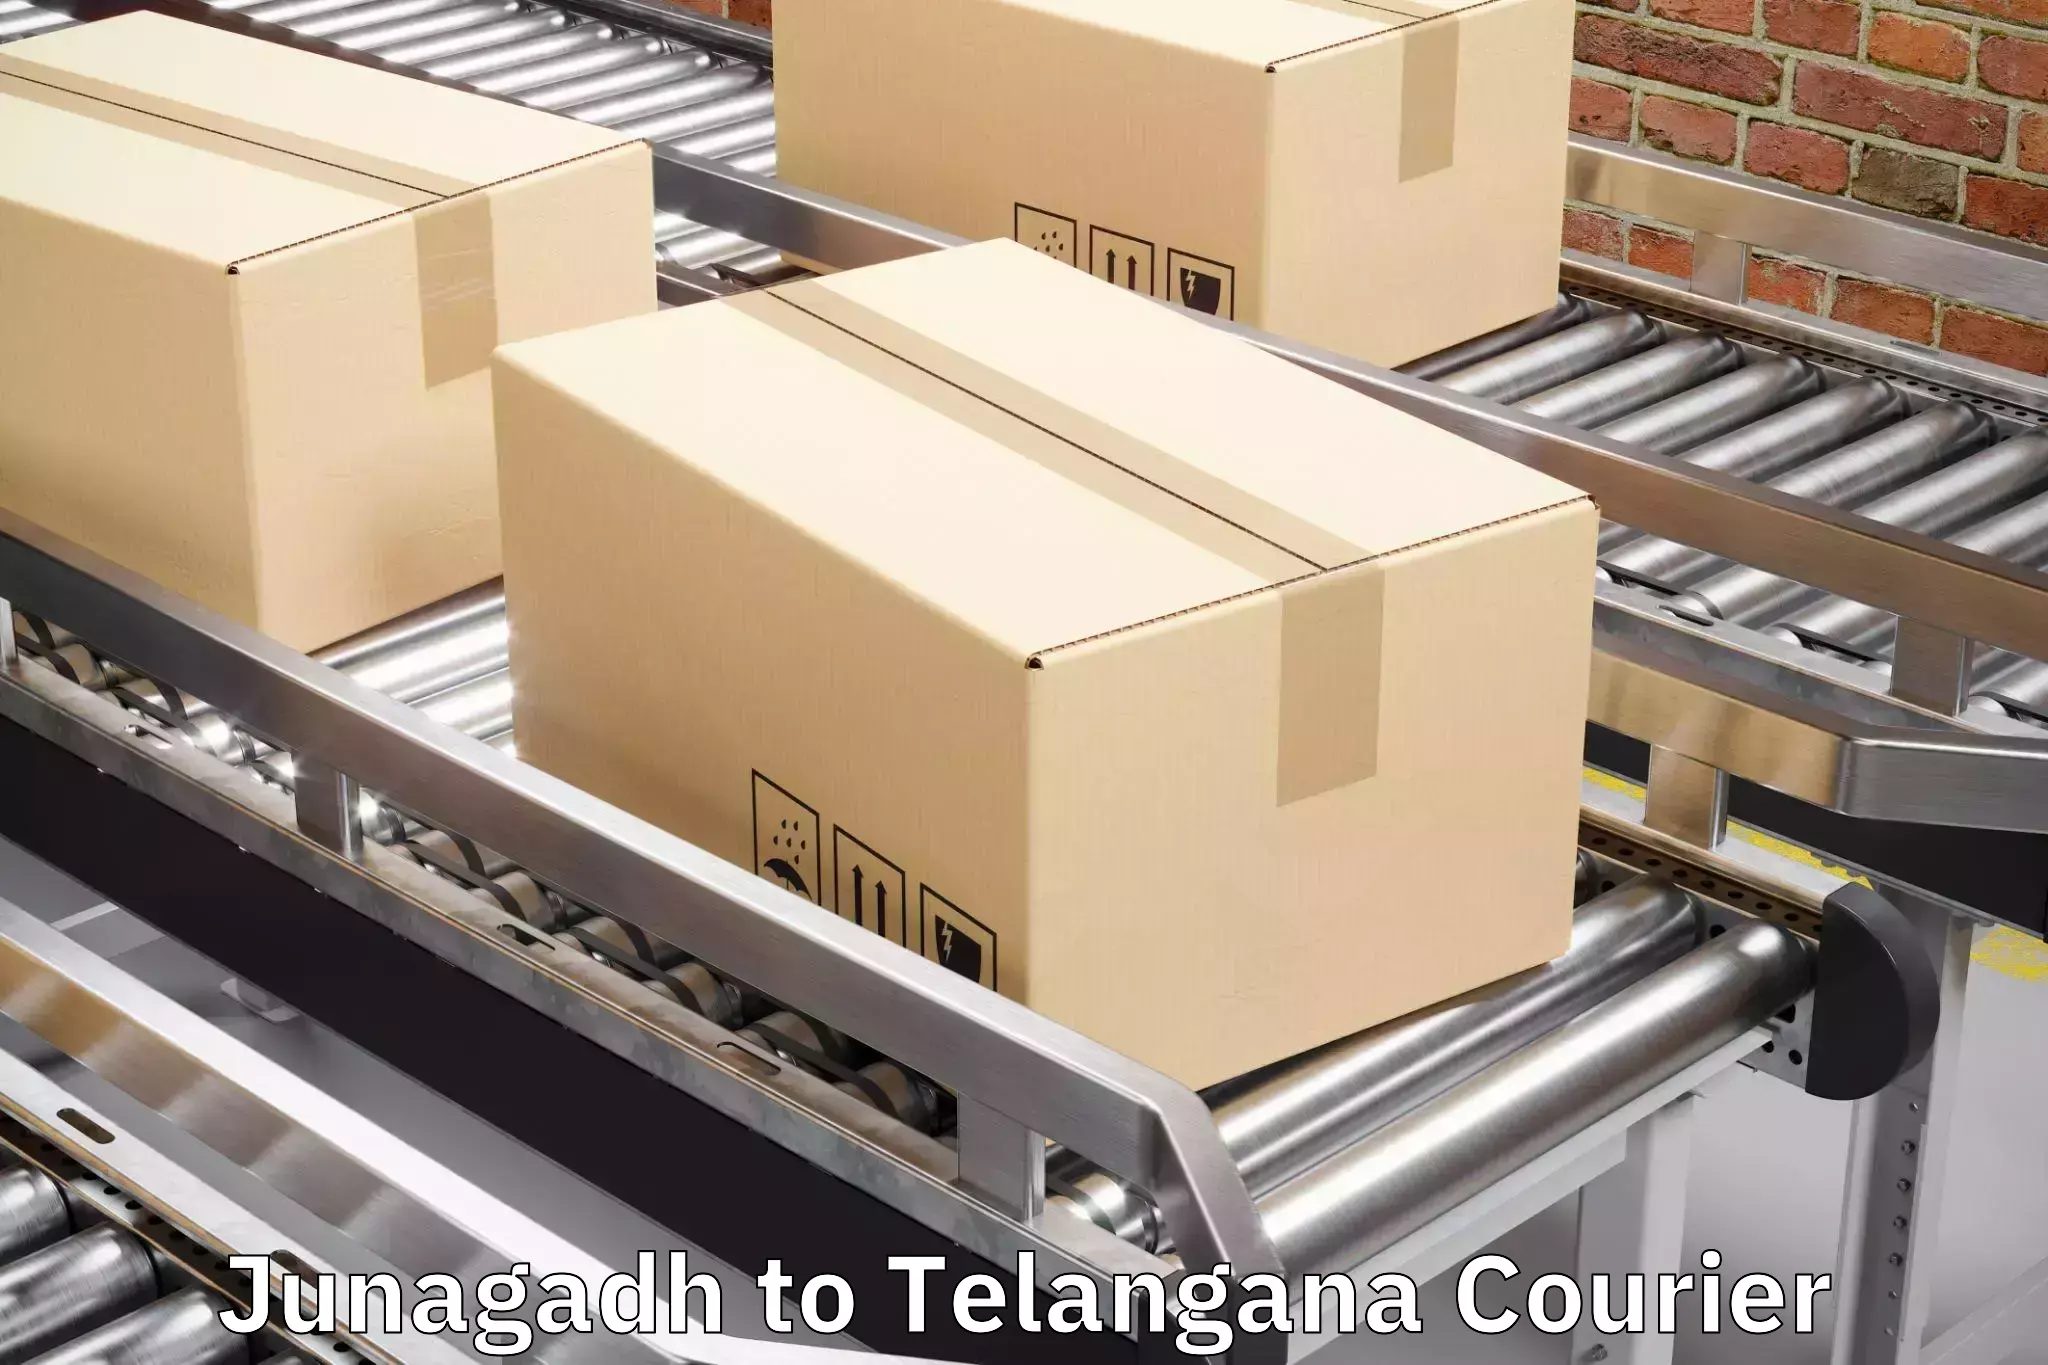 Streamlined baggage delivery Junagadh to Bhainsa